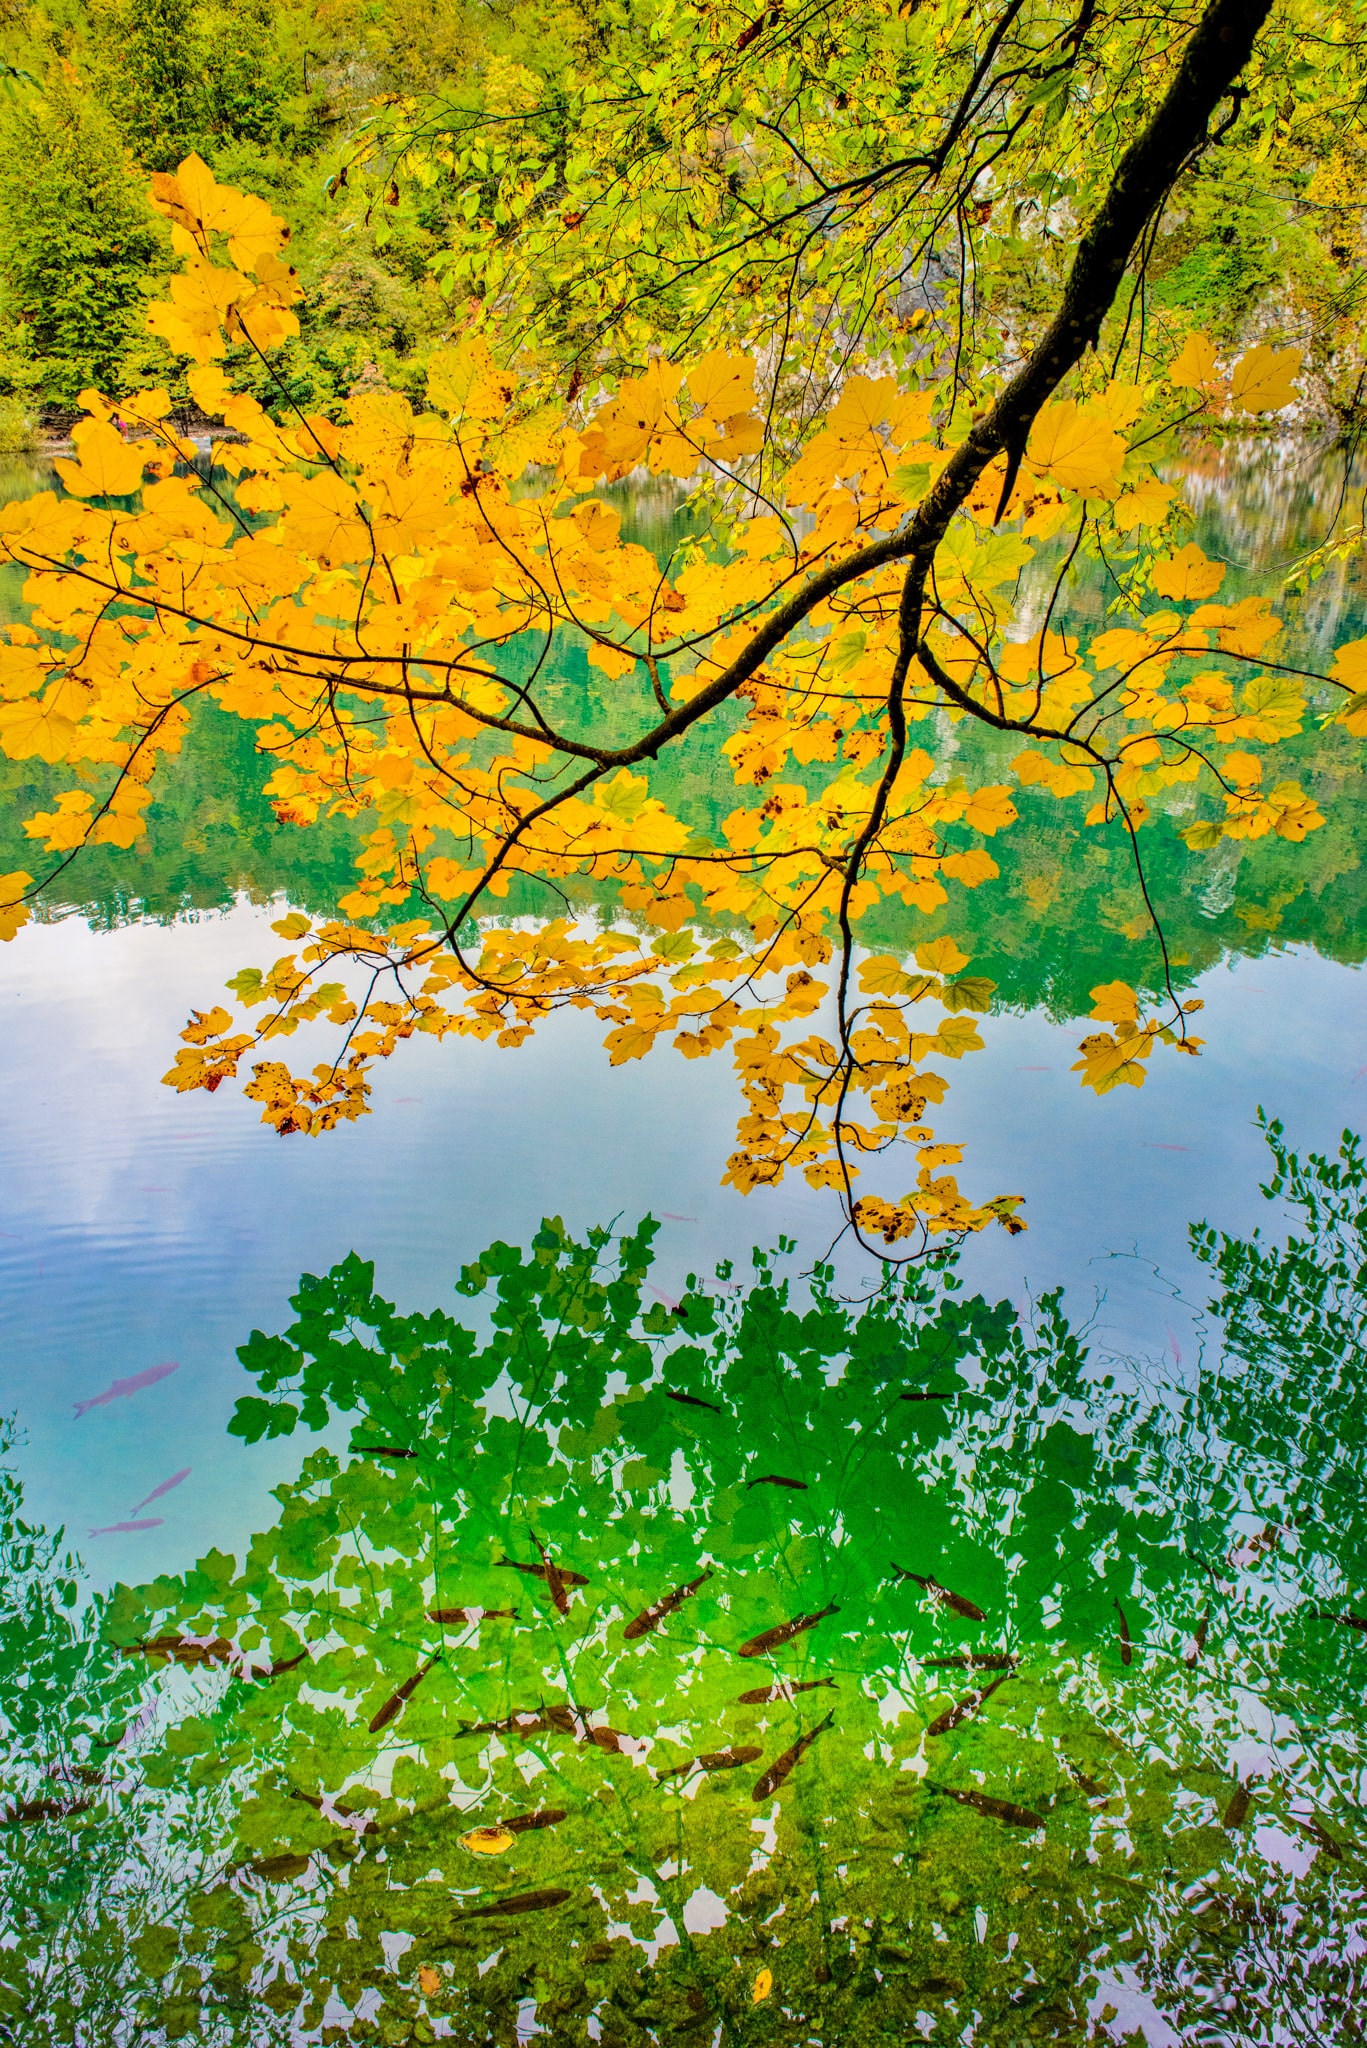 Yellow fall leaves reflect in the fish-filled emerald green water of Plitvice Lakes National Park in Croatia.